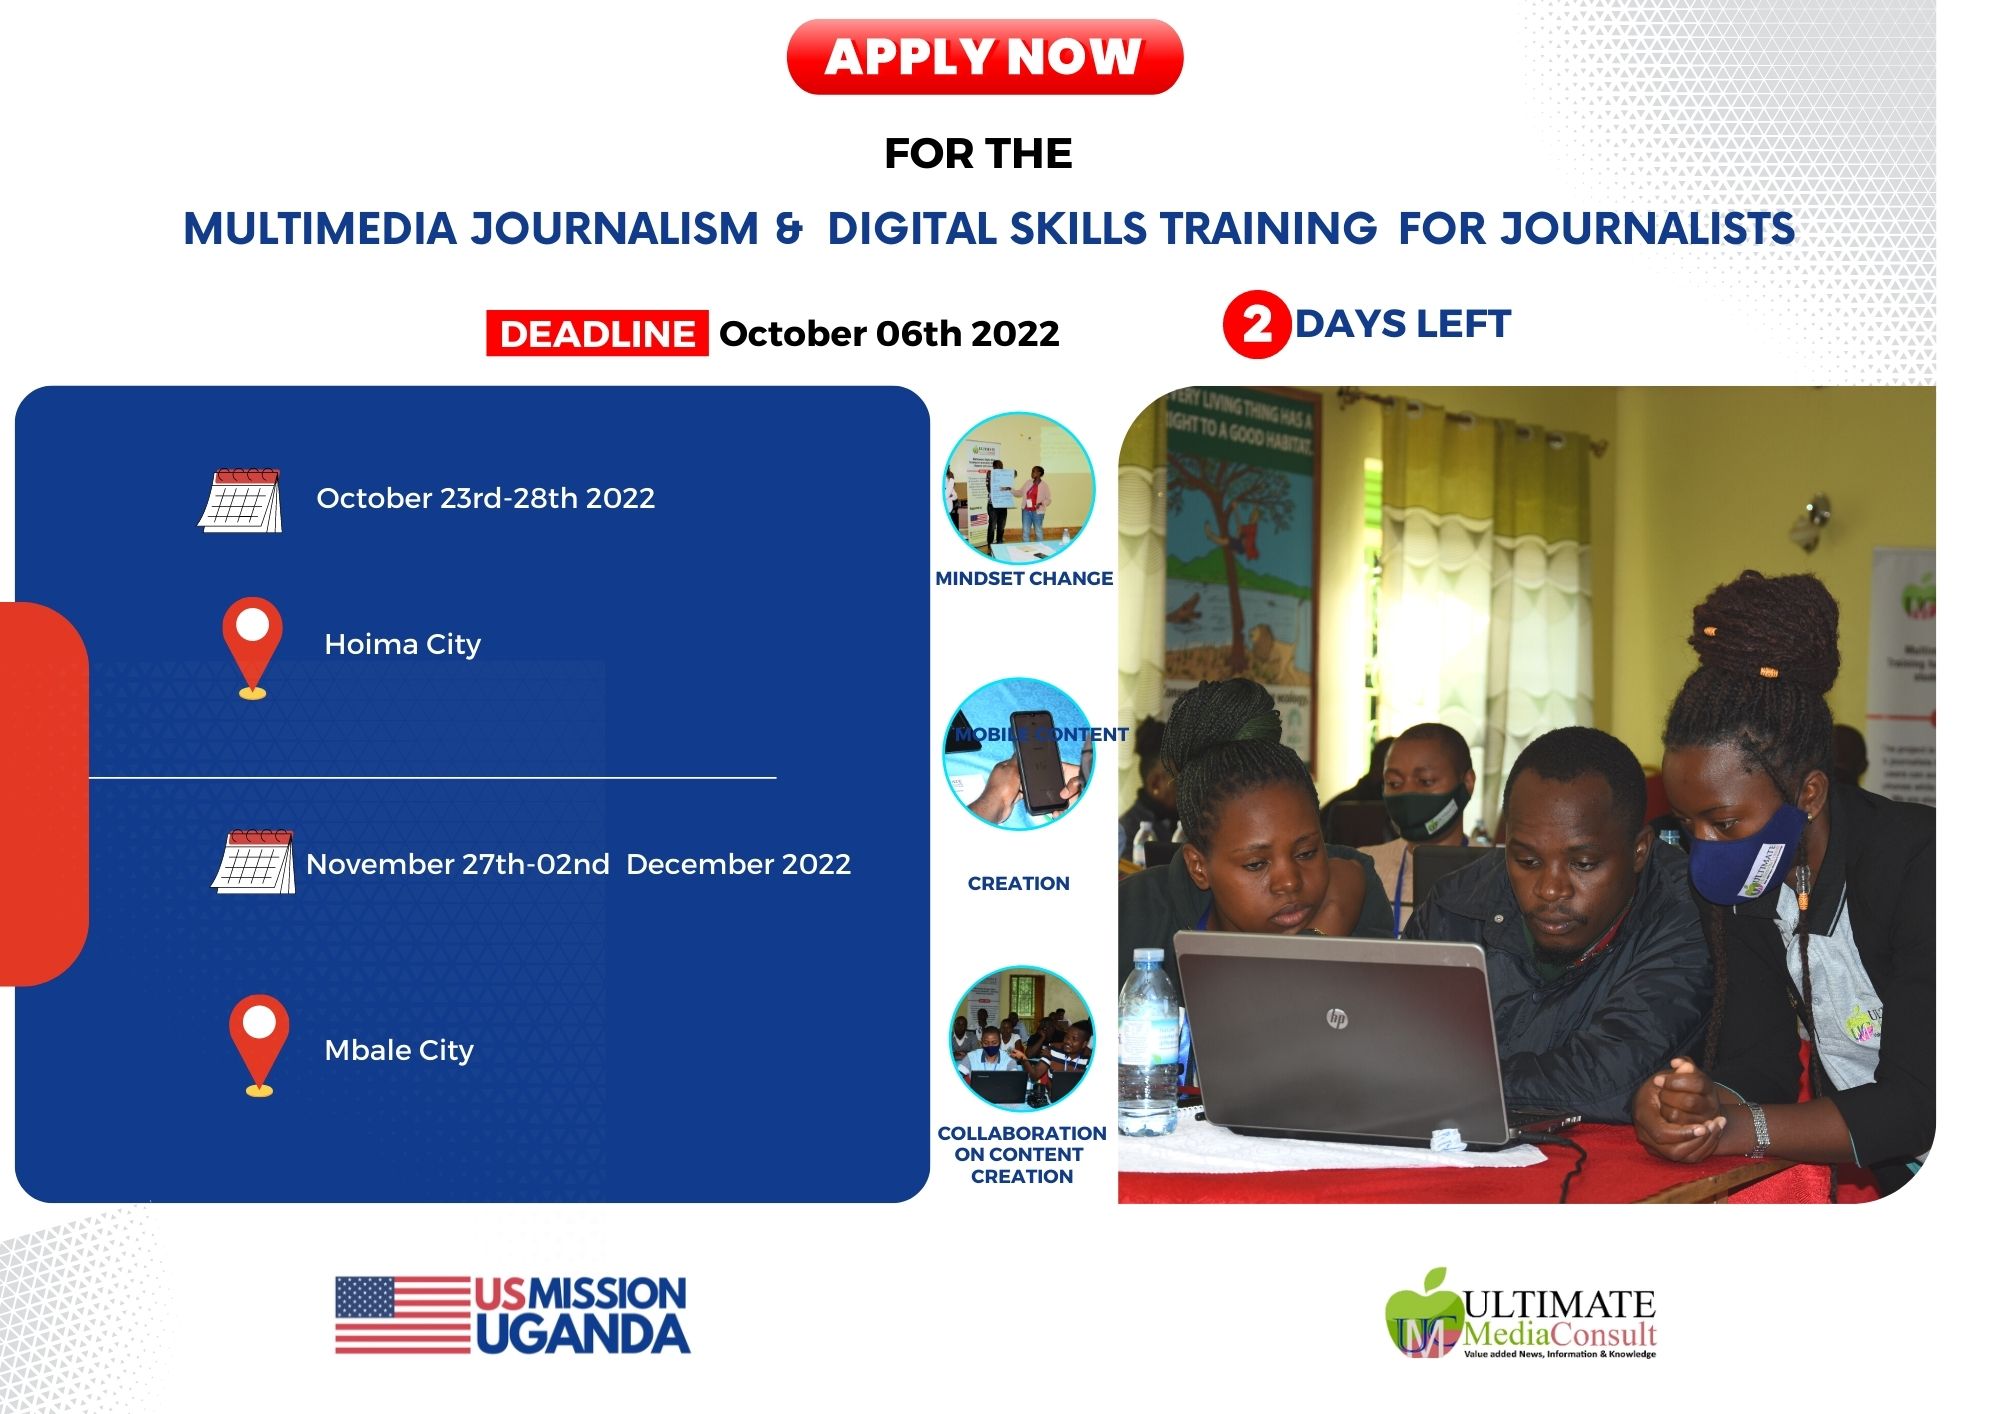 Applications Invited For Journalists To Be Trained In Multimedia Journalism and Digital Skills. 6